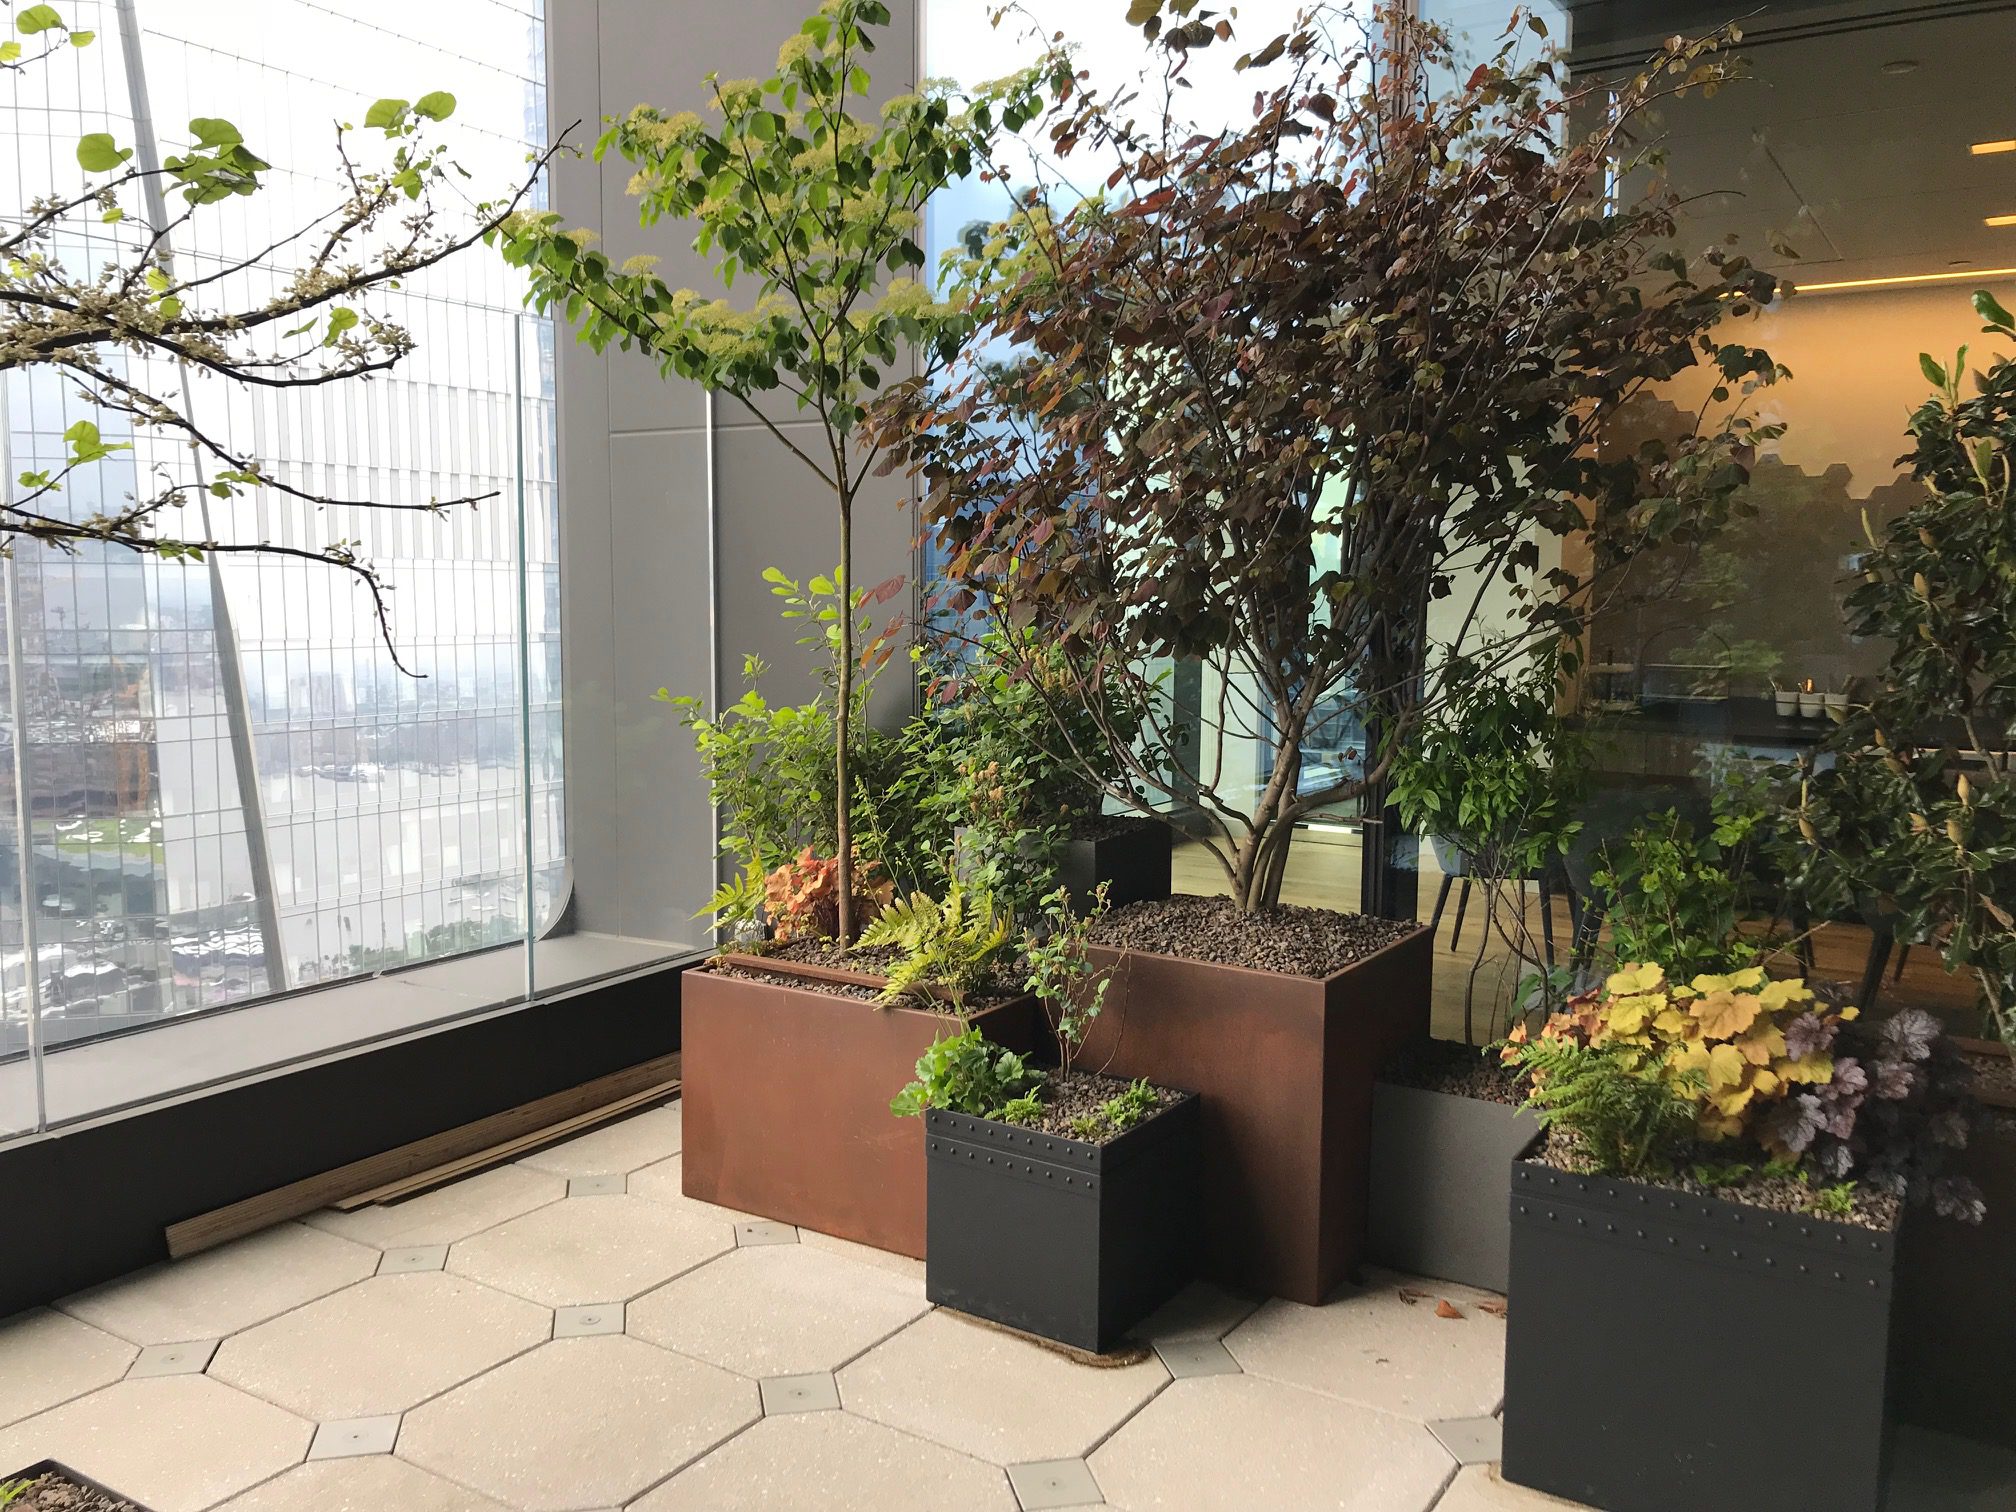 Corten Steel and aluminum planters with trees and greenery planted in them sit inside a high-rise building.